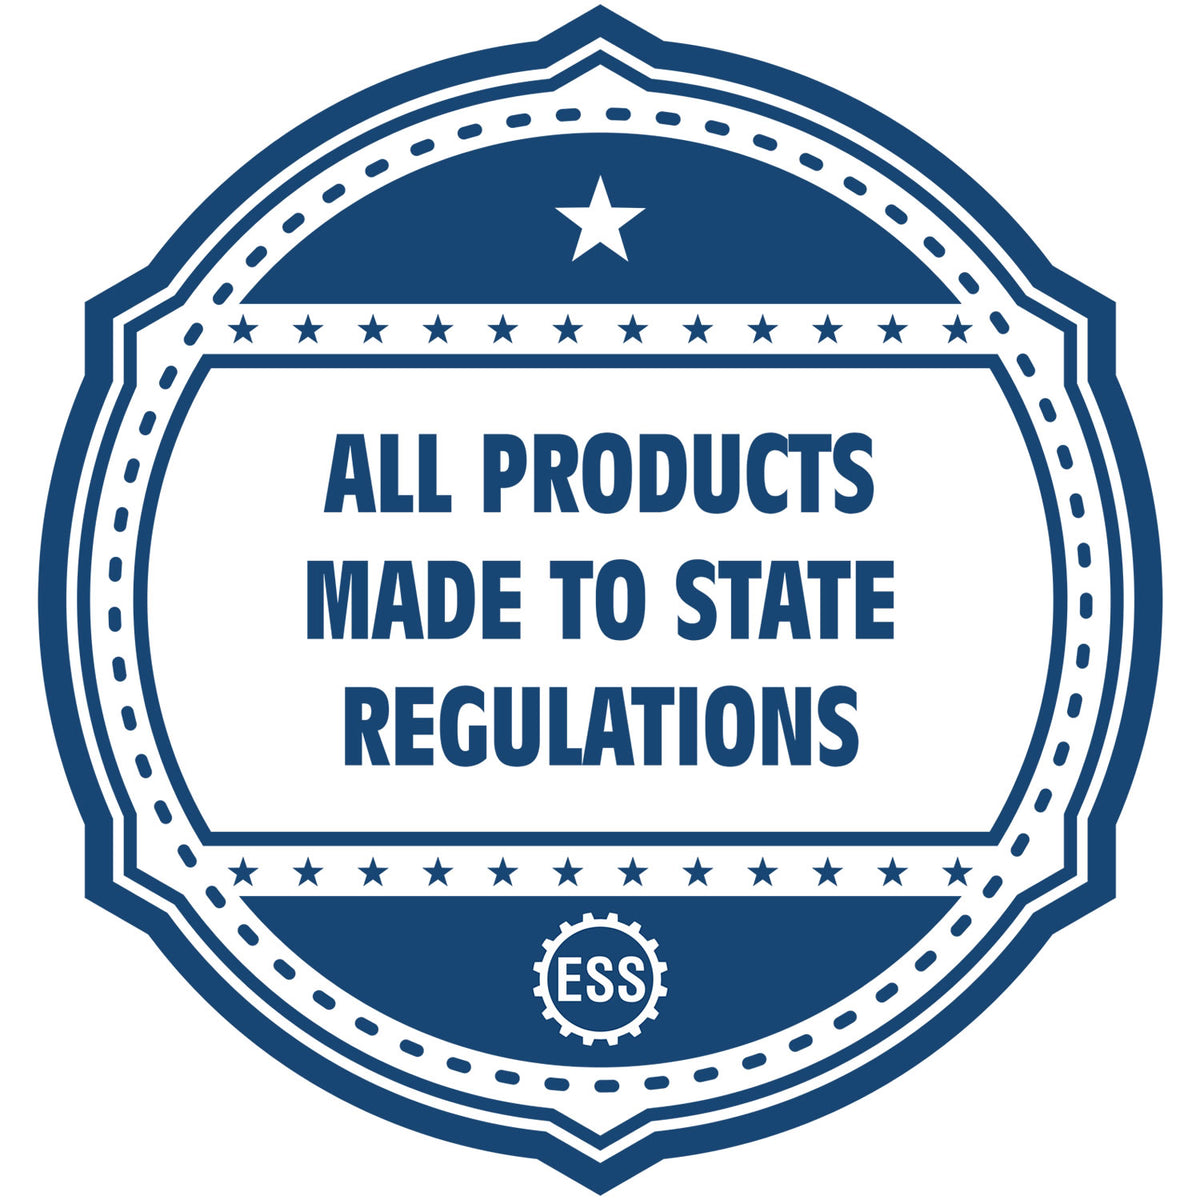 An icon or badge element for the Super Slim Louisiana Notary Public Stamp showing that this product is made in compliance with state regulations.